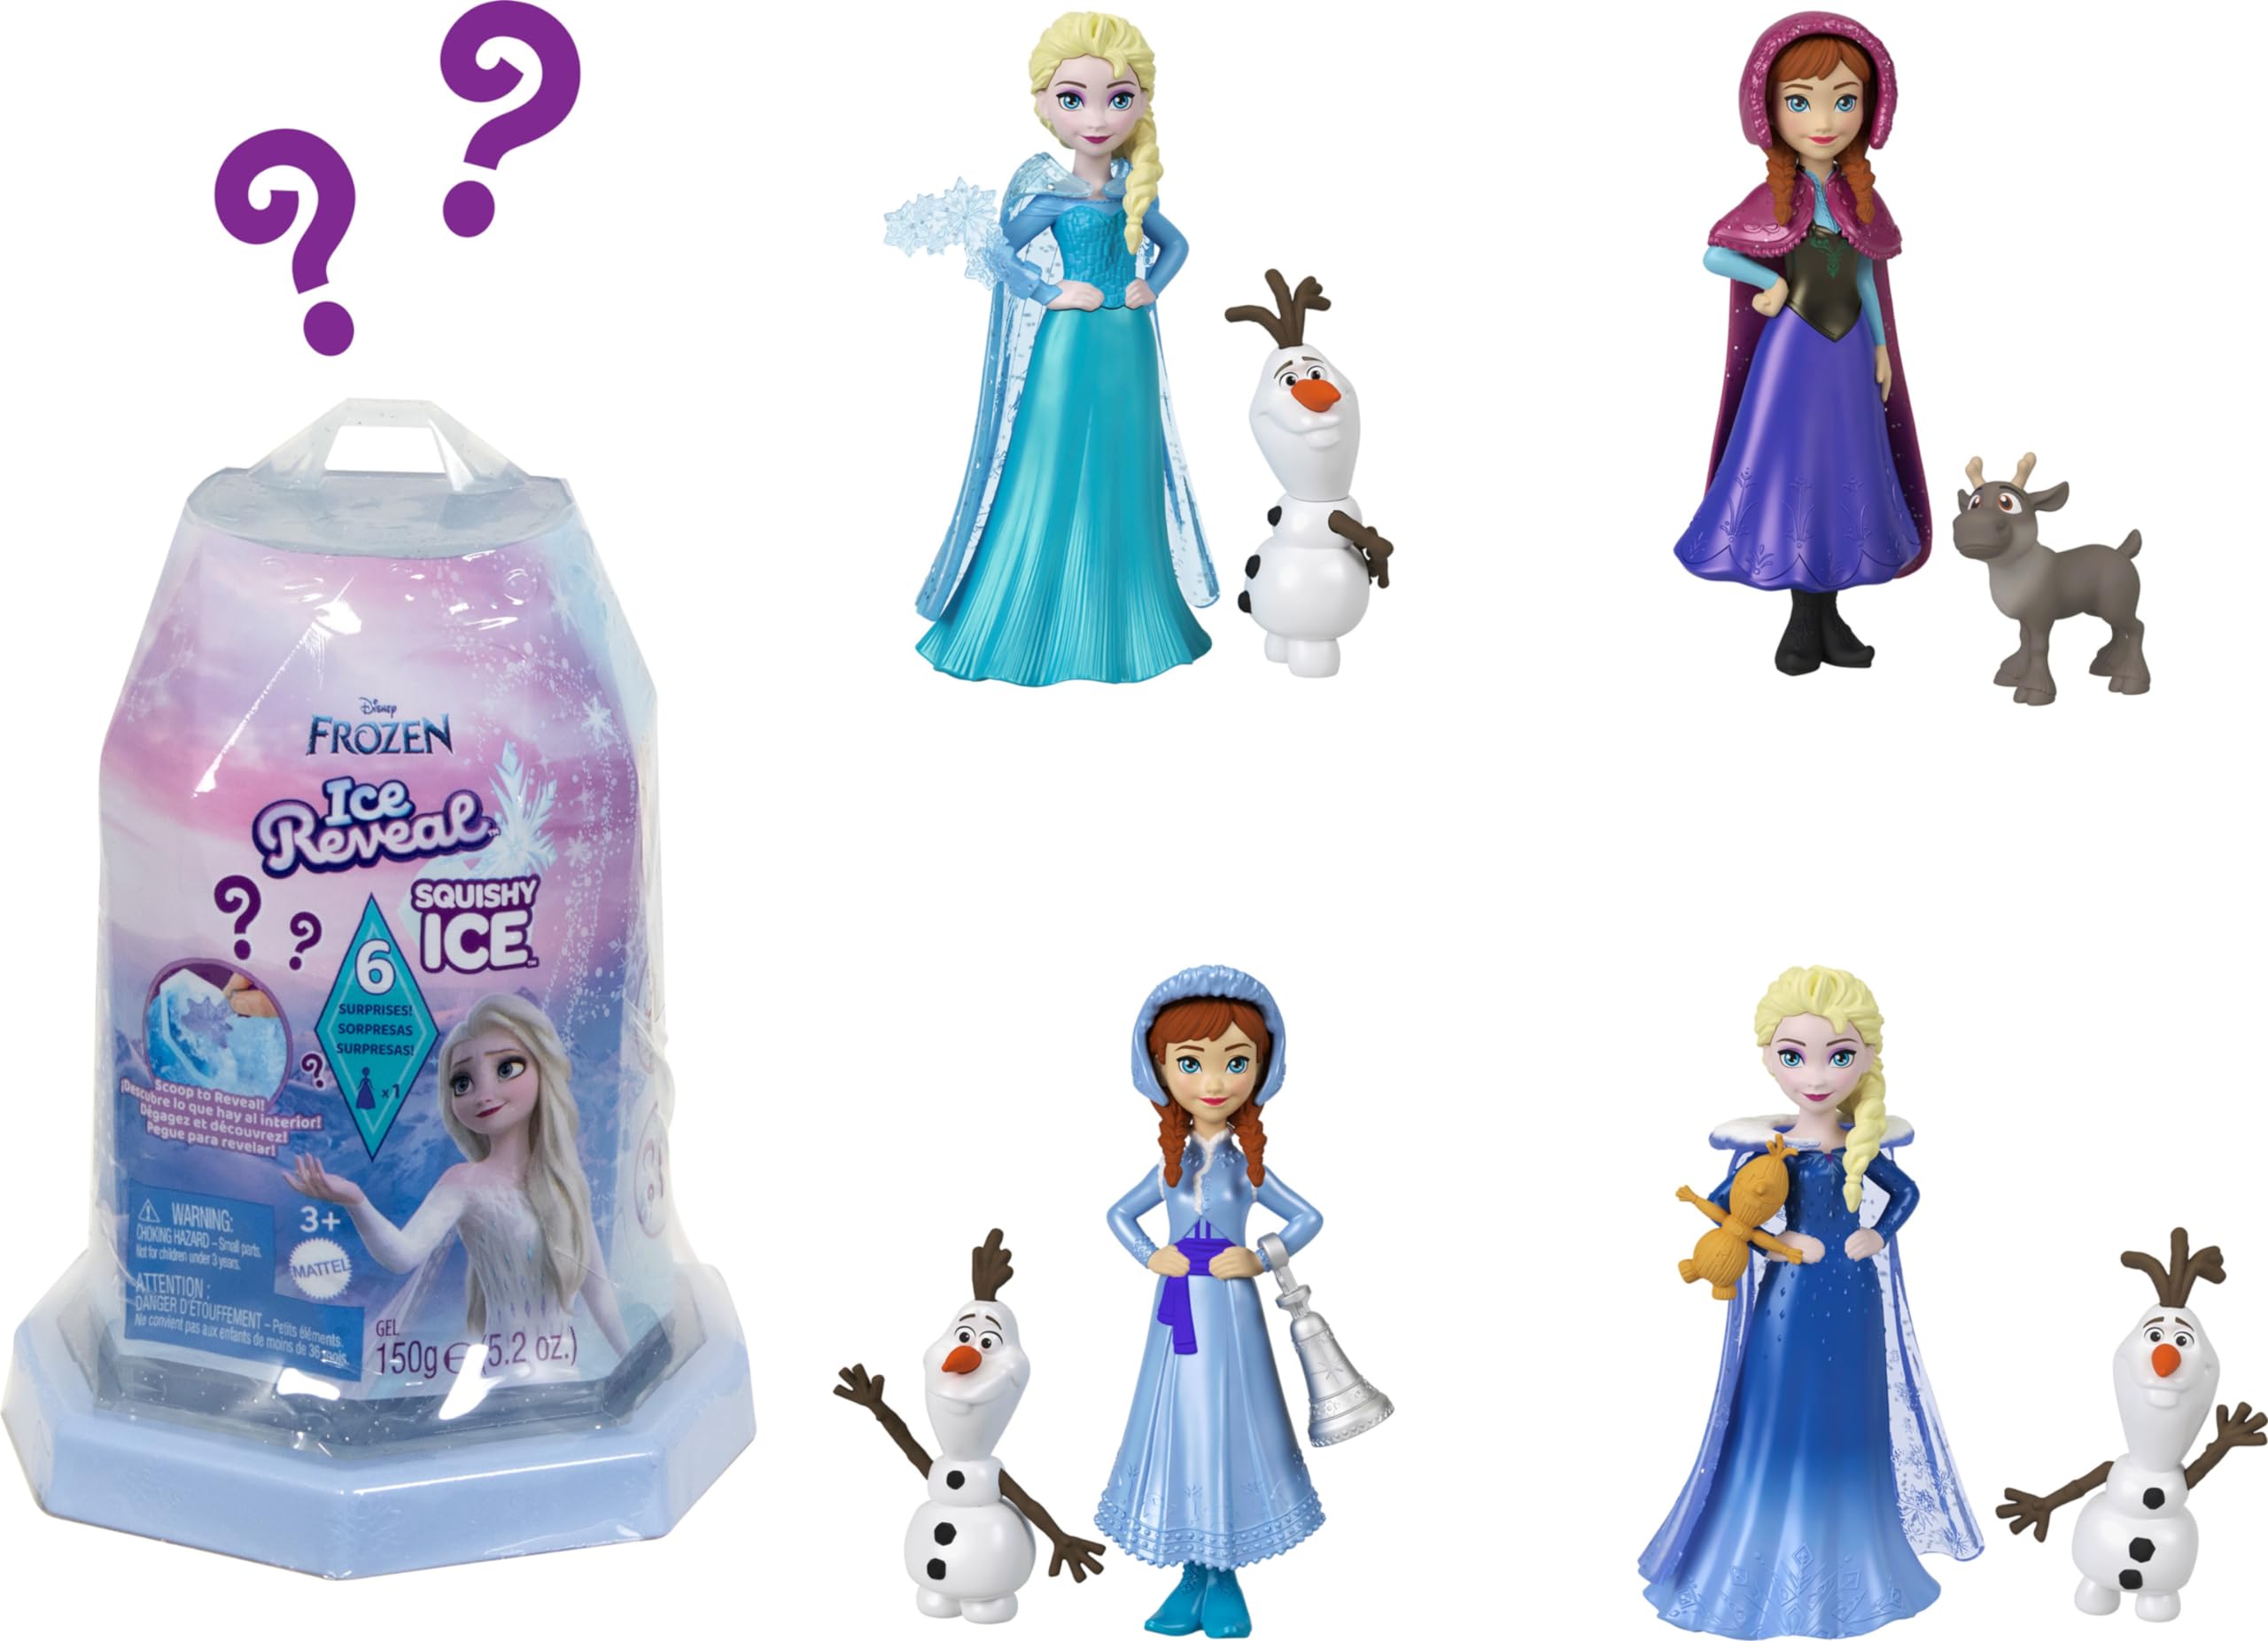 Mattel Disney Frozen Small Doll Ice Reveal with Squishy Ice Gel and 6 Surprises Including Character Friend & Play Pieces (Dolls May Vary)